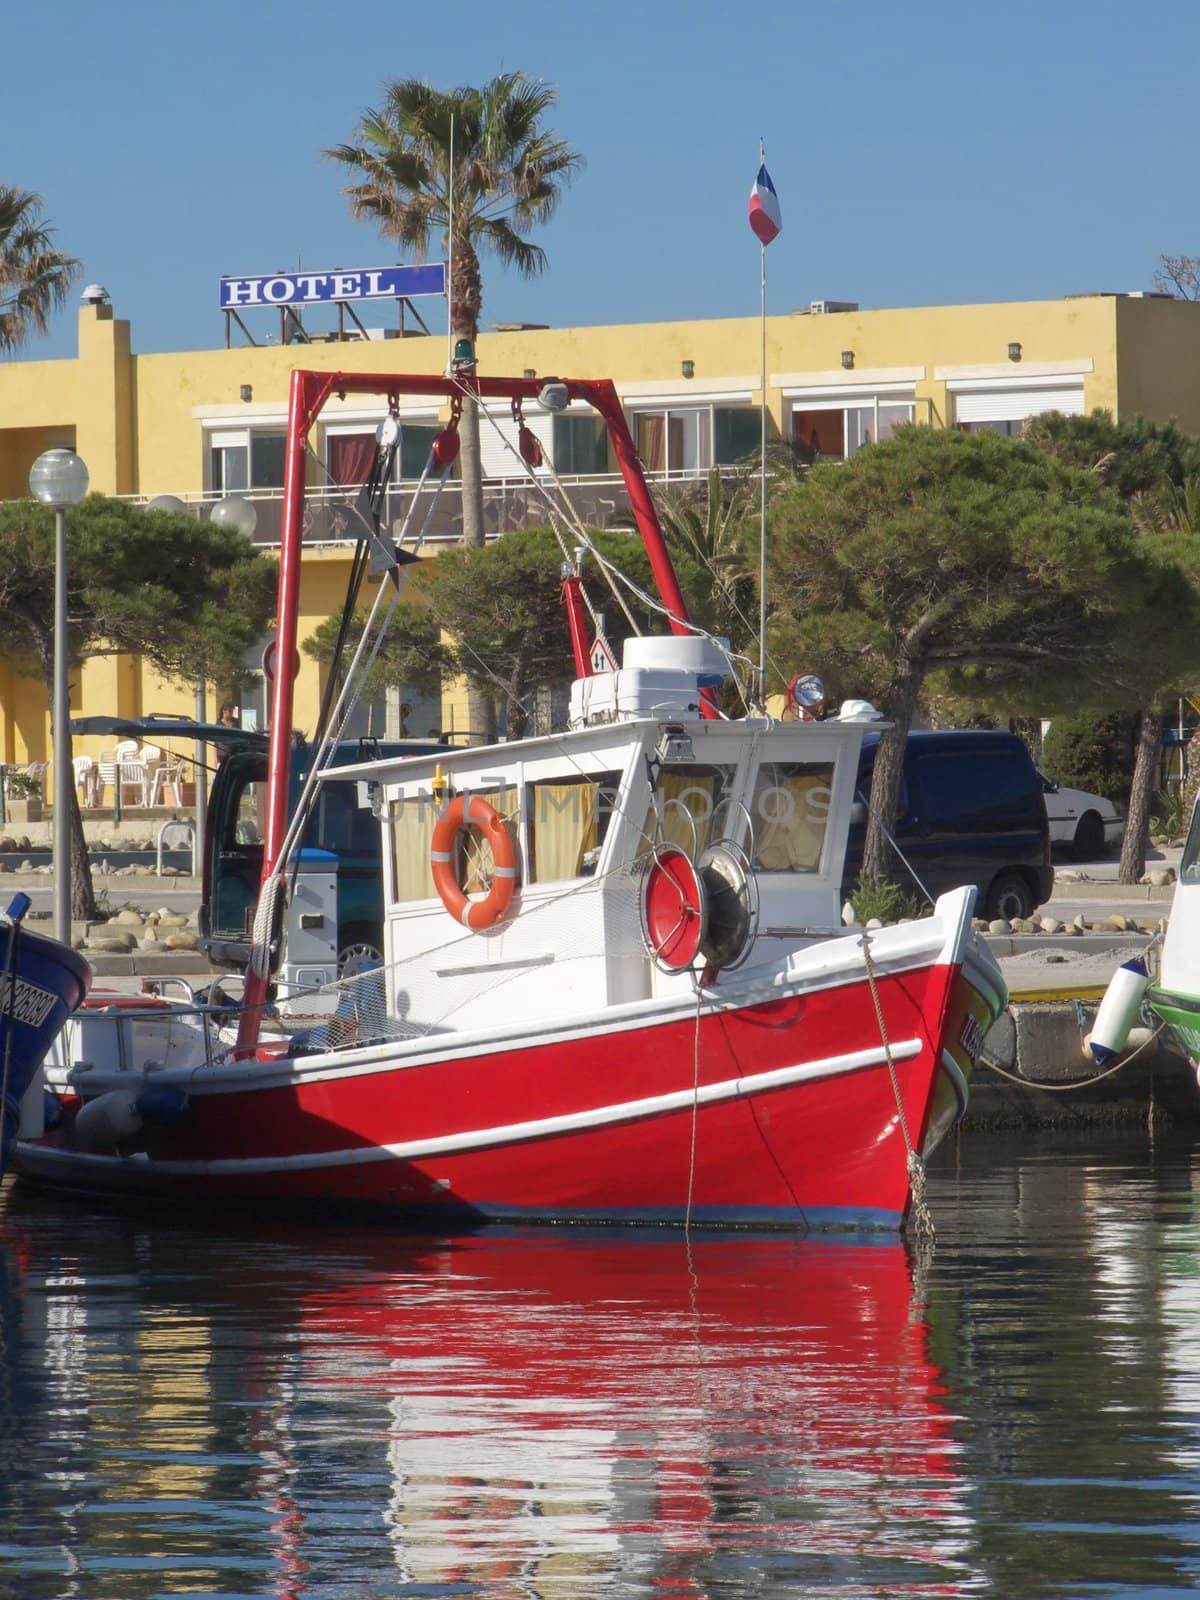 digital image of a red fisher boat at Mediterranean habor